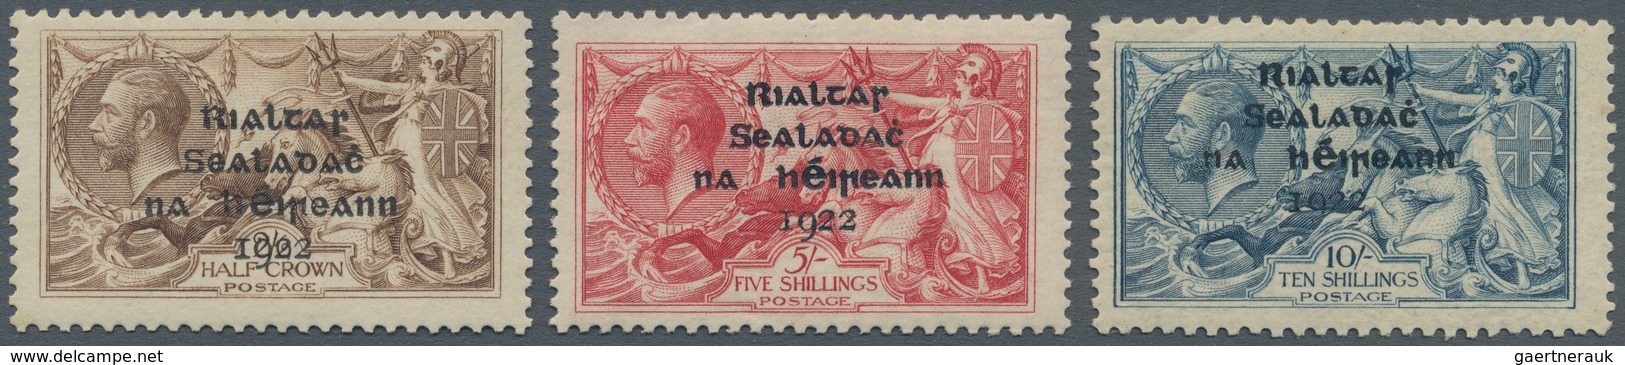 Irland: 1922, Rialtas Overprints, Thom Printing, 2s.6d. Sepia-brown, 5s. Rose-carmie And 10s. Dull G - Covers & Documents